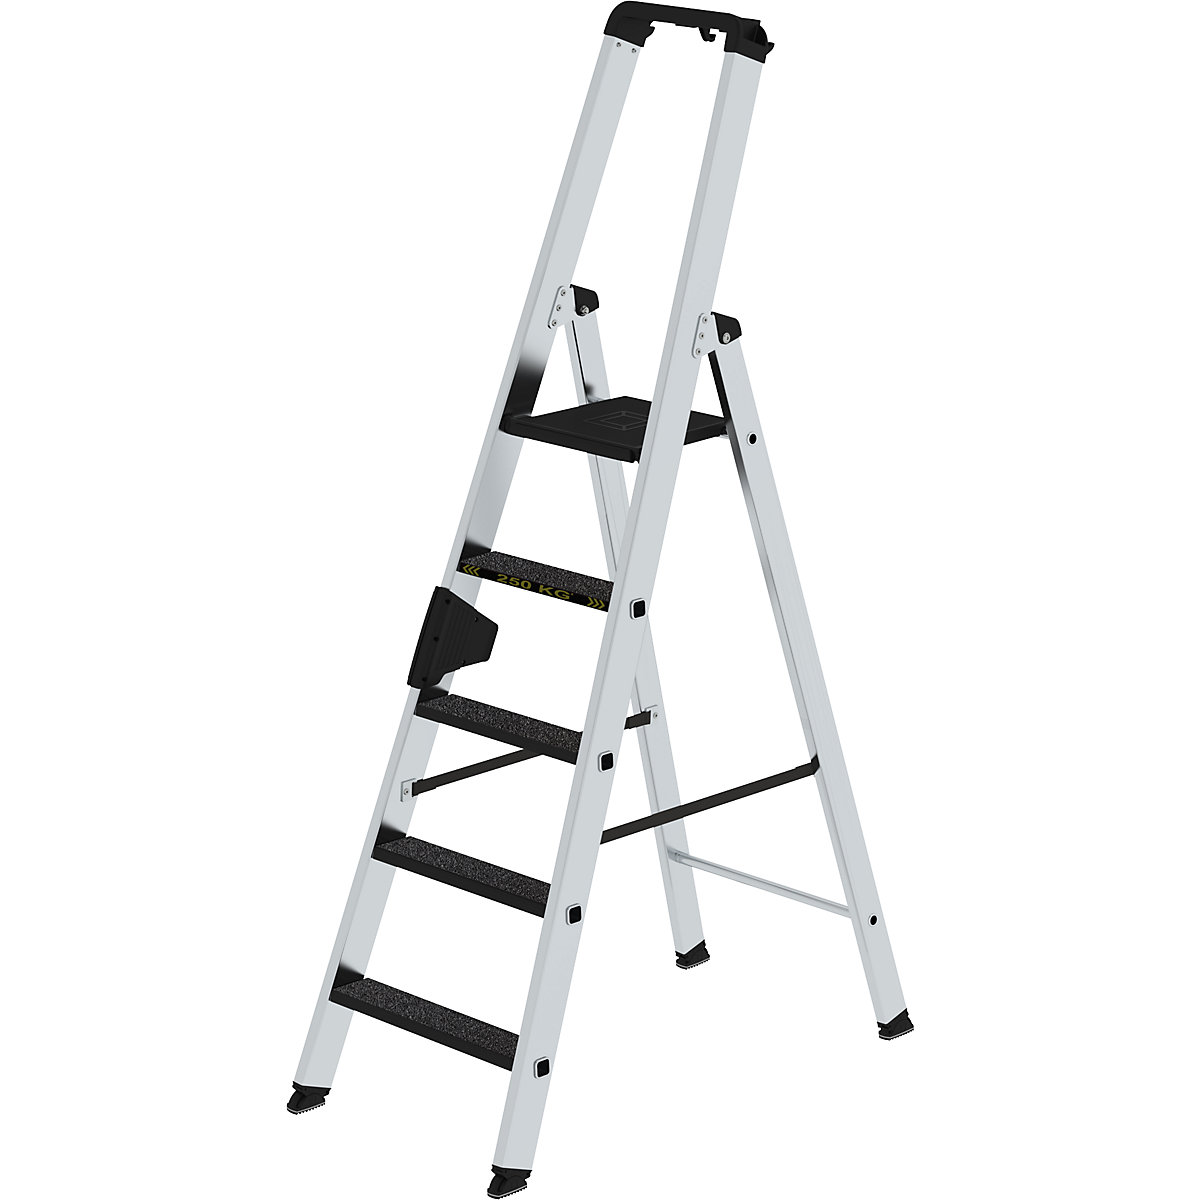 CLIP-STEP step ladder – MUNK, single sided access, slip resistant R13, durable, 5 steps-10